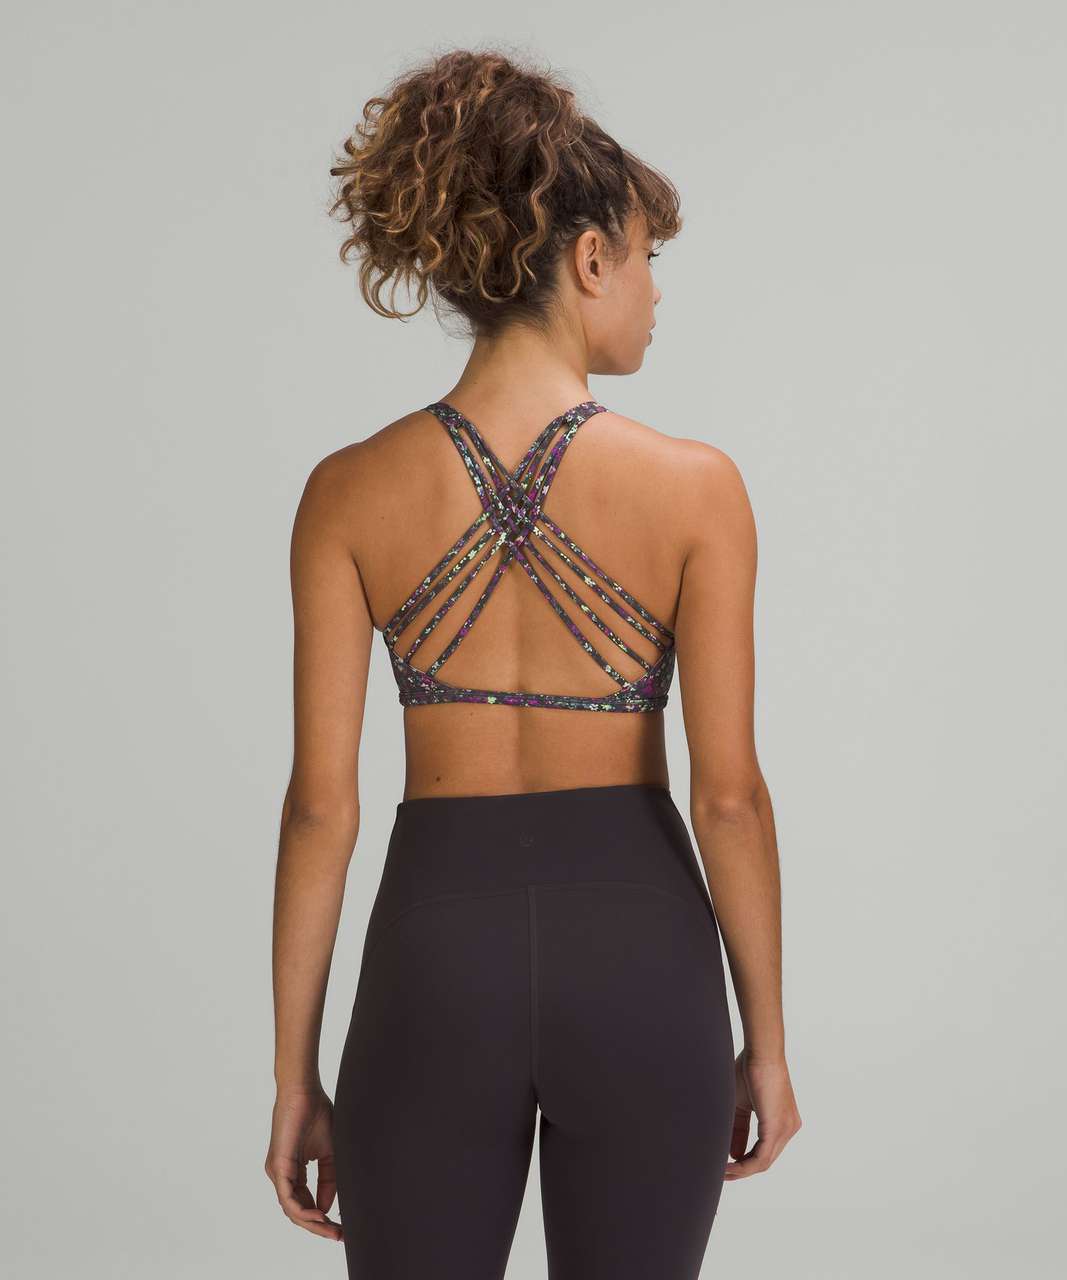 Lululemon Free to Be Bra - Wild *Light Support, A/B Cup - Fleur Motion Multi